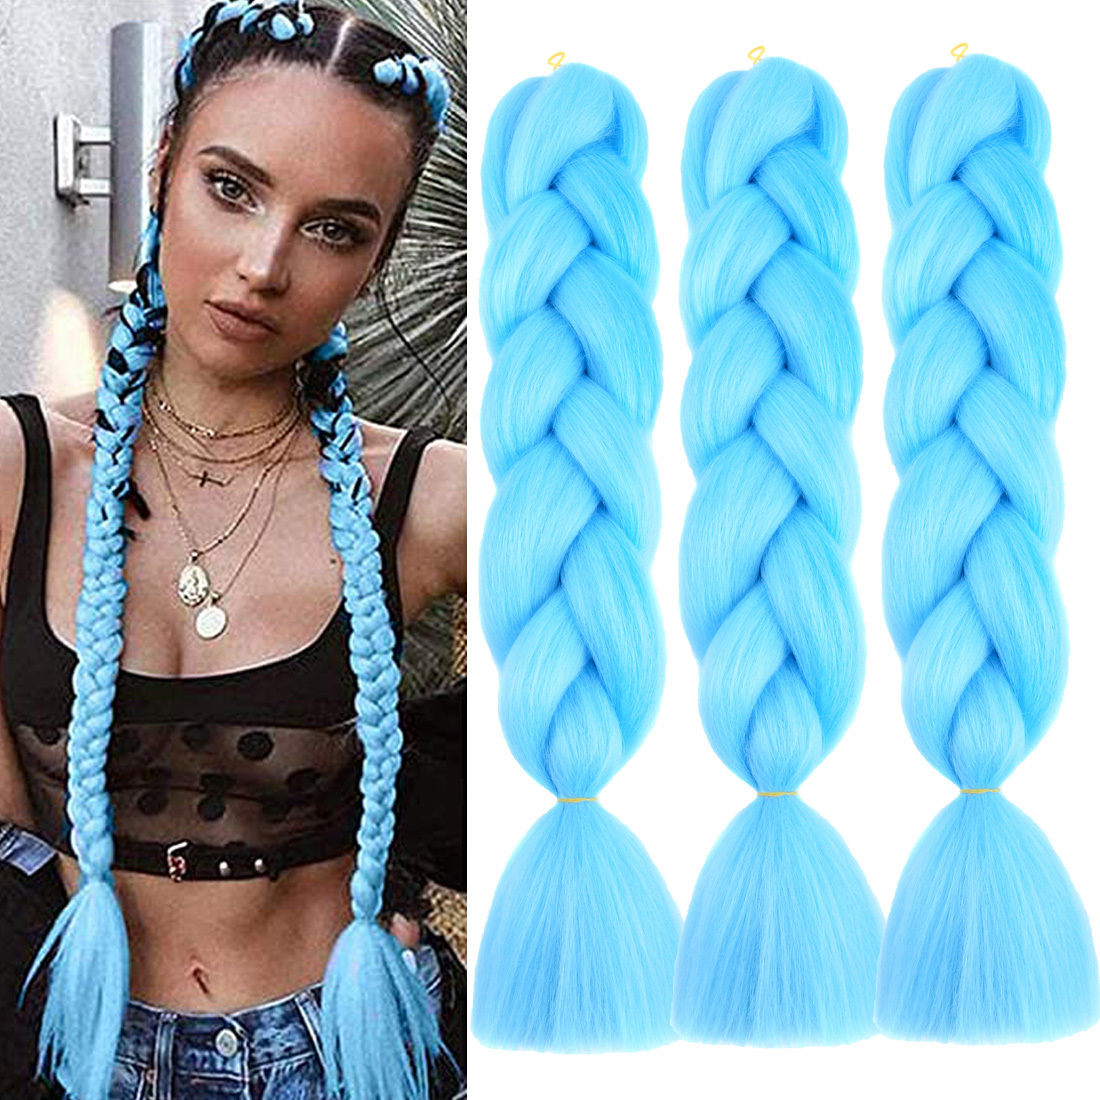 Jumbo Braids Synthetic Hair Extensions Crochet Braiding #A31 Color 3Pcs 24inch - $13.99